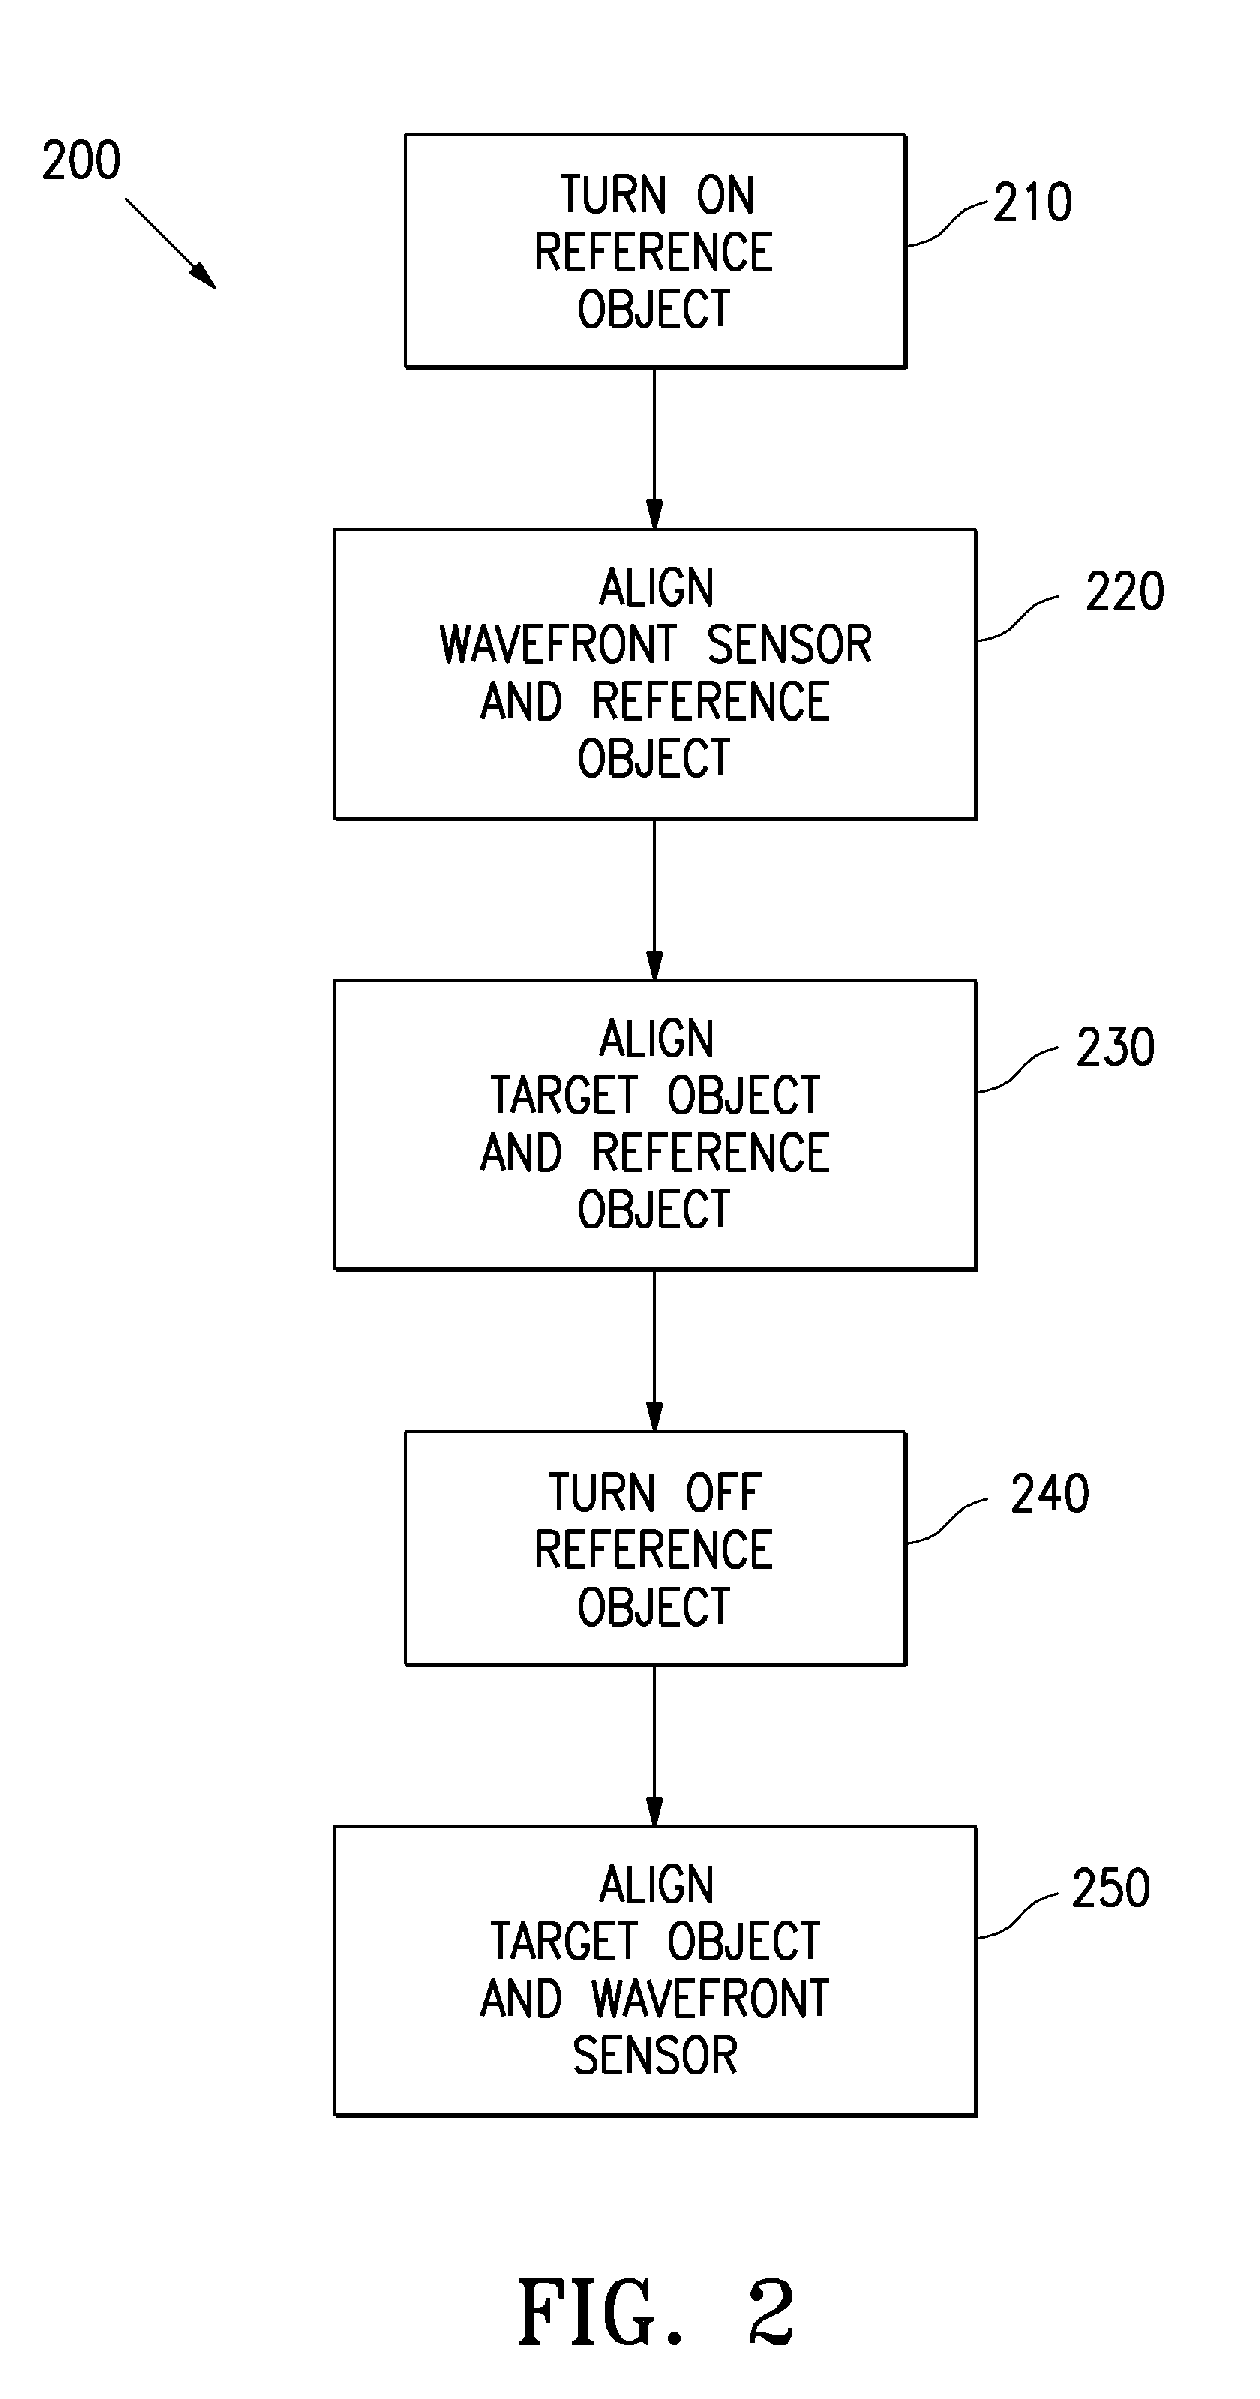 Adaptive optics imaging system with object acquisition capability